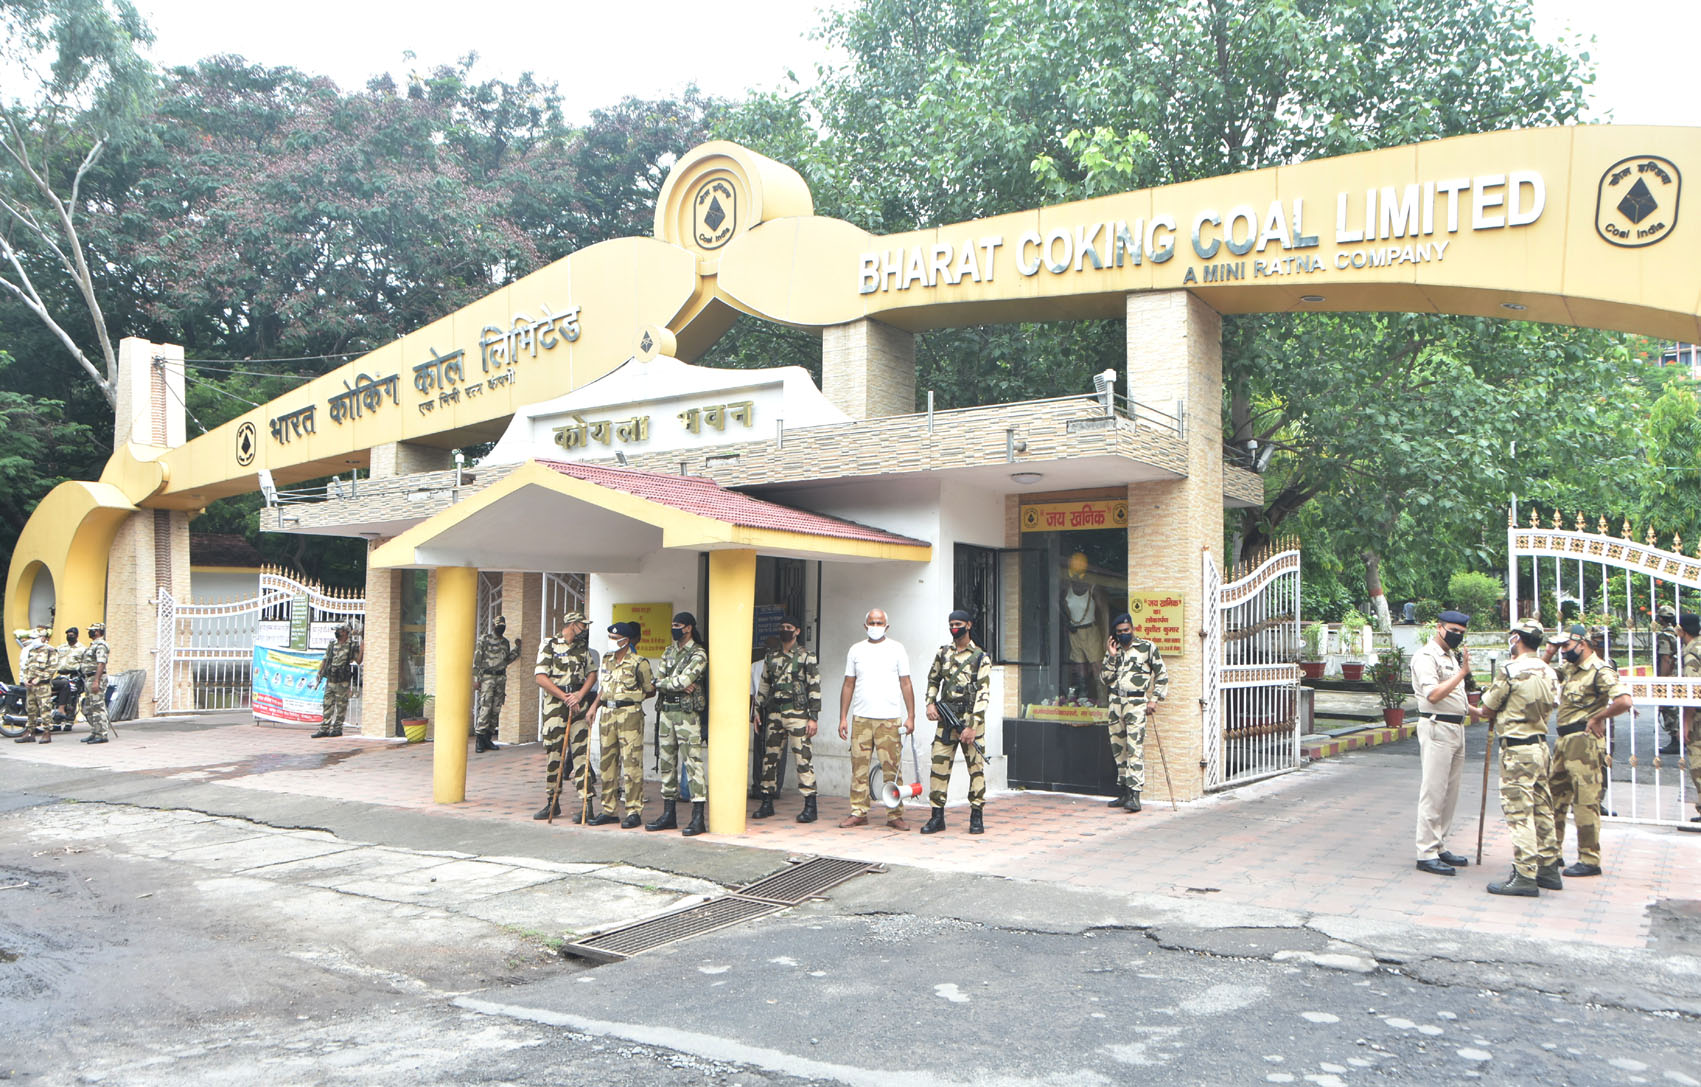 CISF jawans on guard at the main gate of Koyla Bhavan, the BCCL headquarters in Dhanbad, on Thursday. The day saw several demonstrations against the Centre’s decision to allow coal mining for commercial purposes